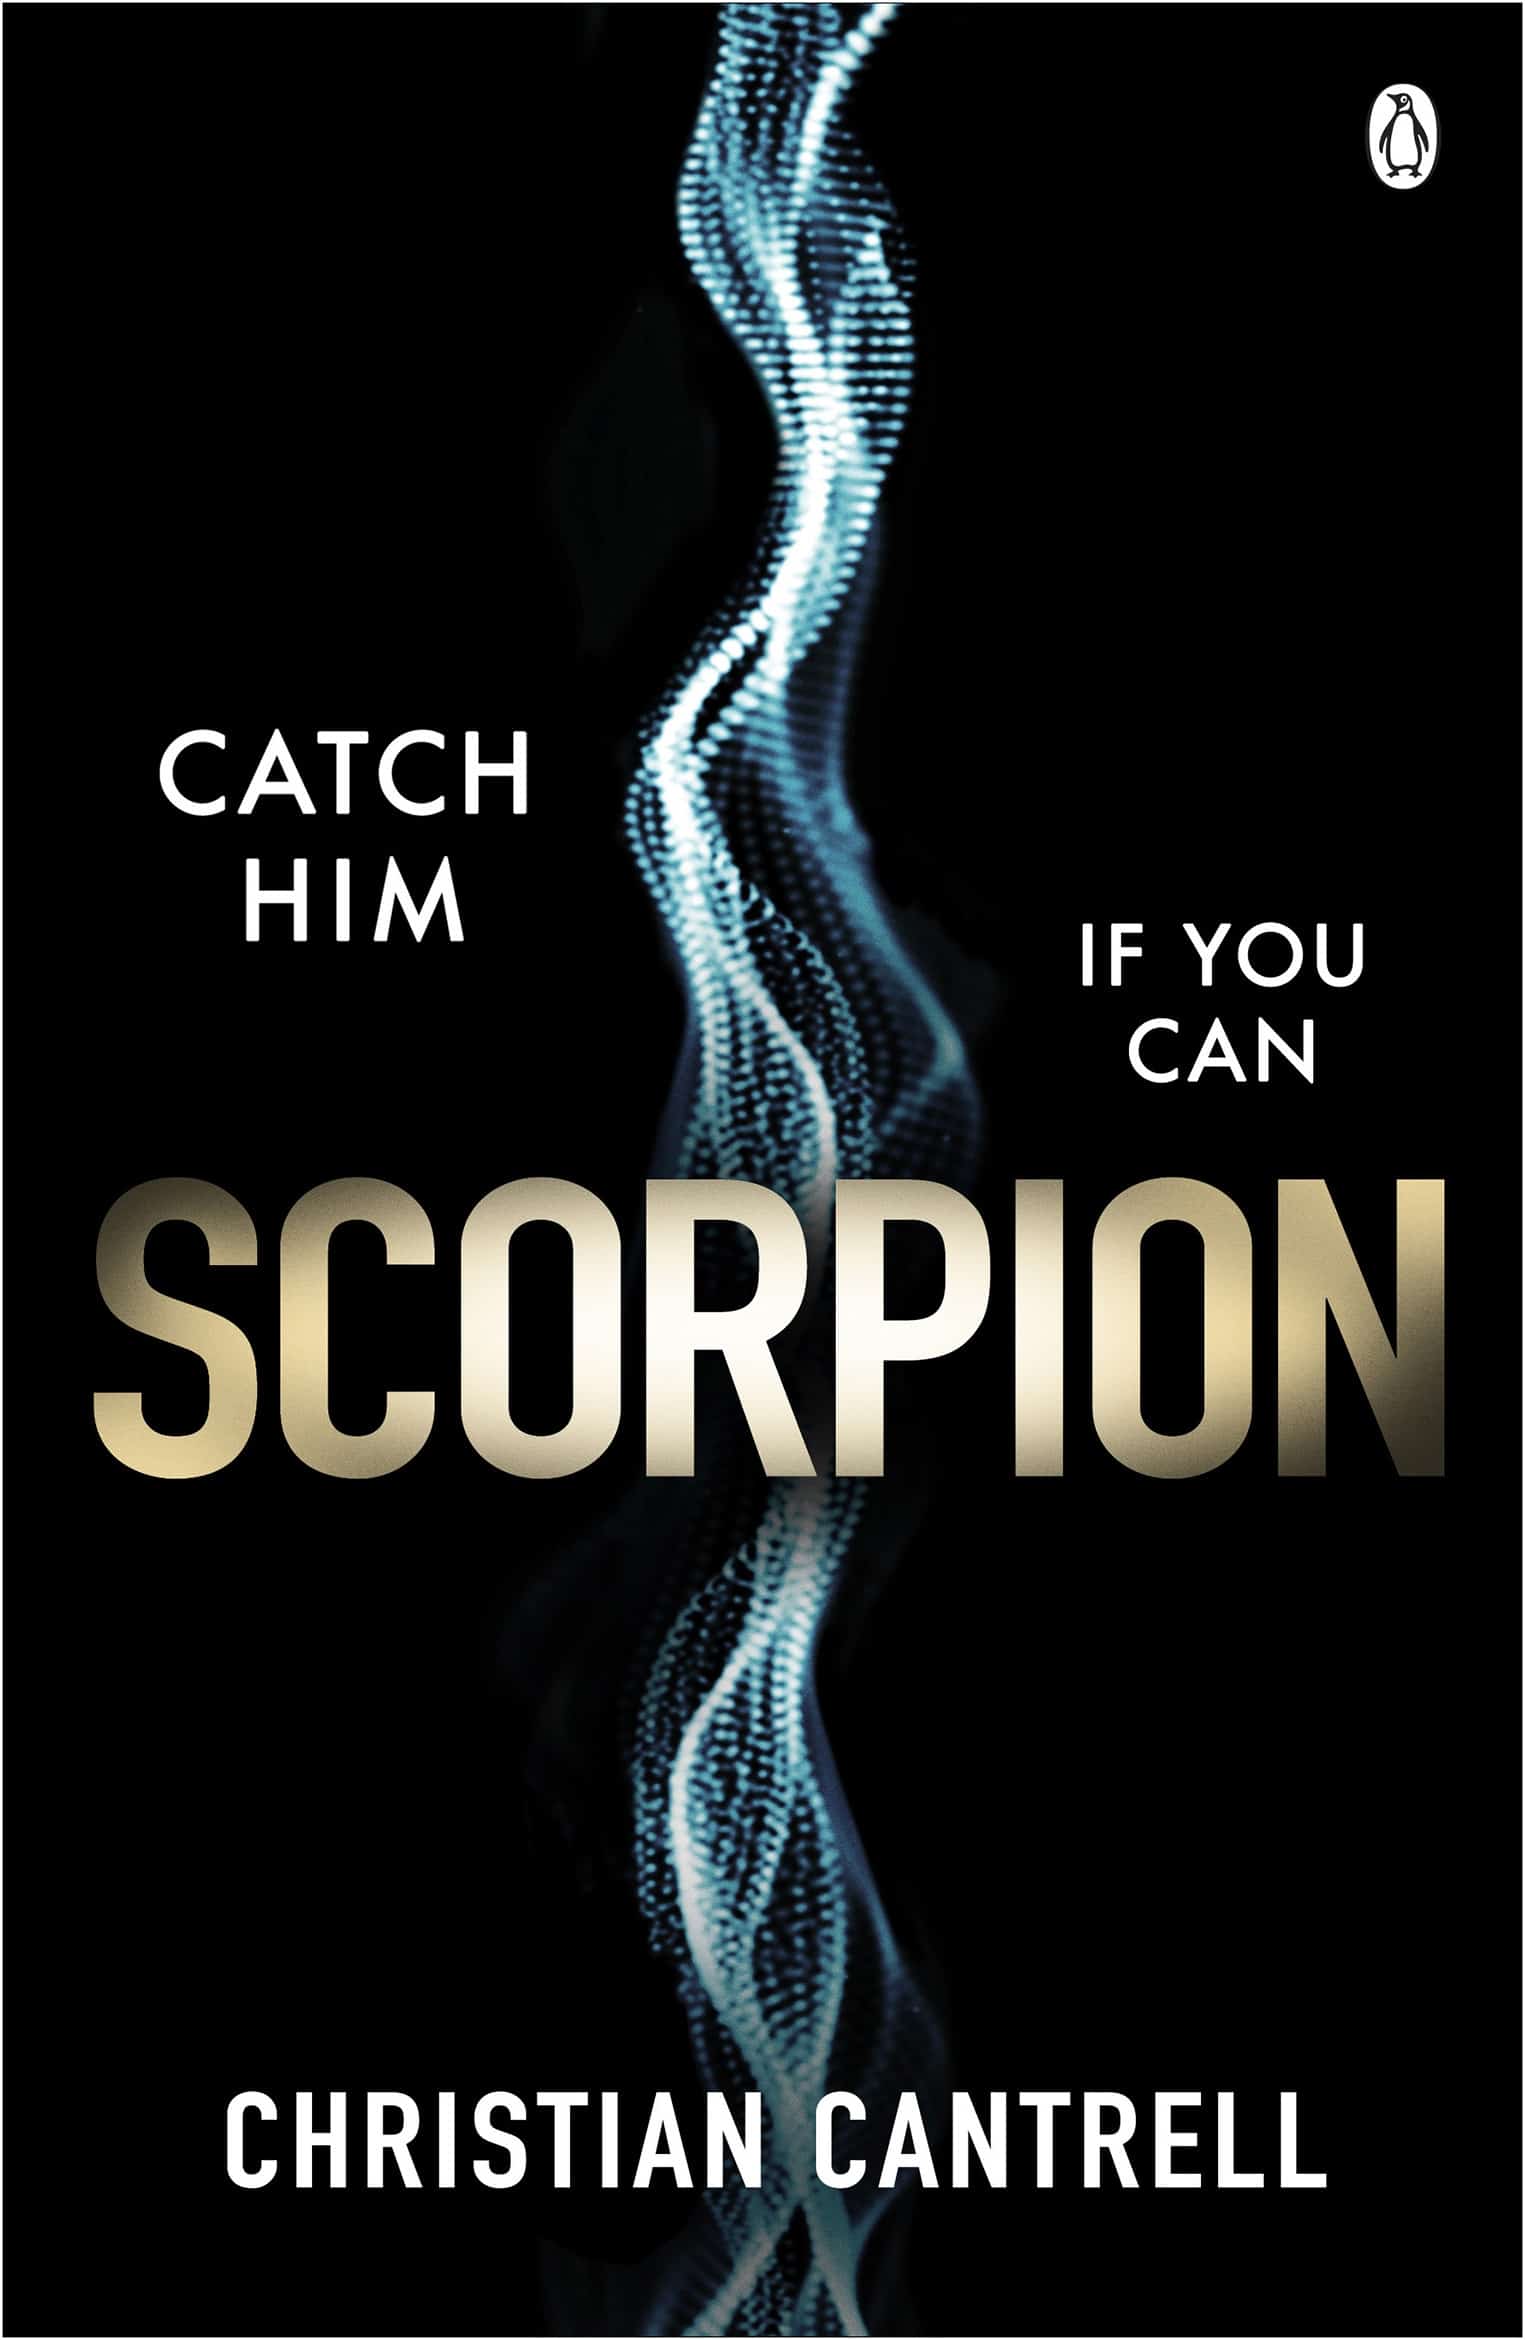 Book cover of Scorpion by Christian Cantrell